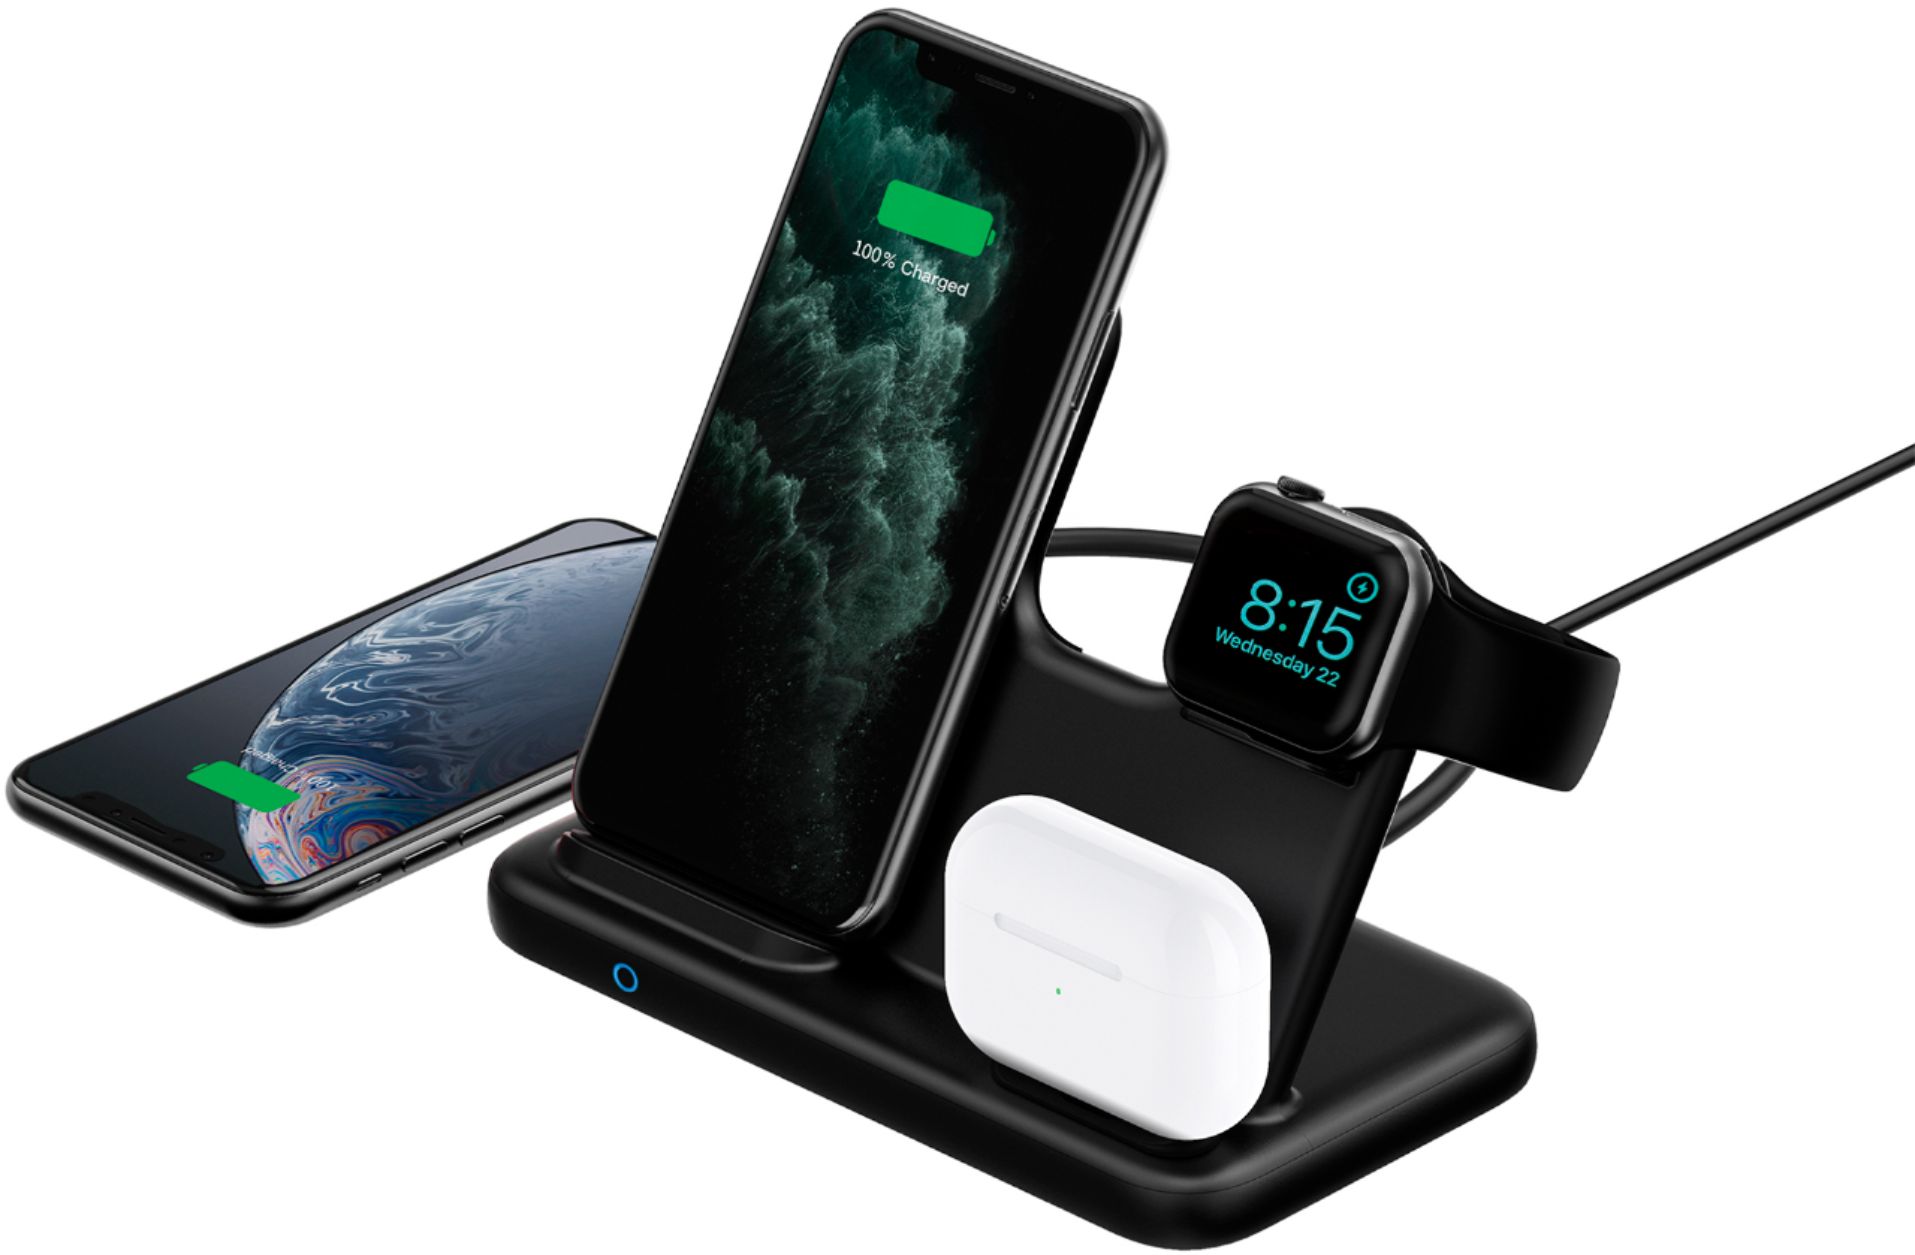 Wireless Chargers - Anker US